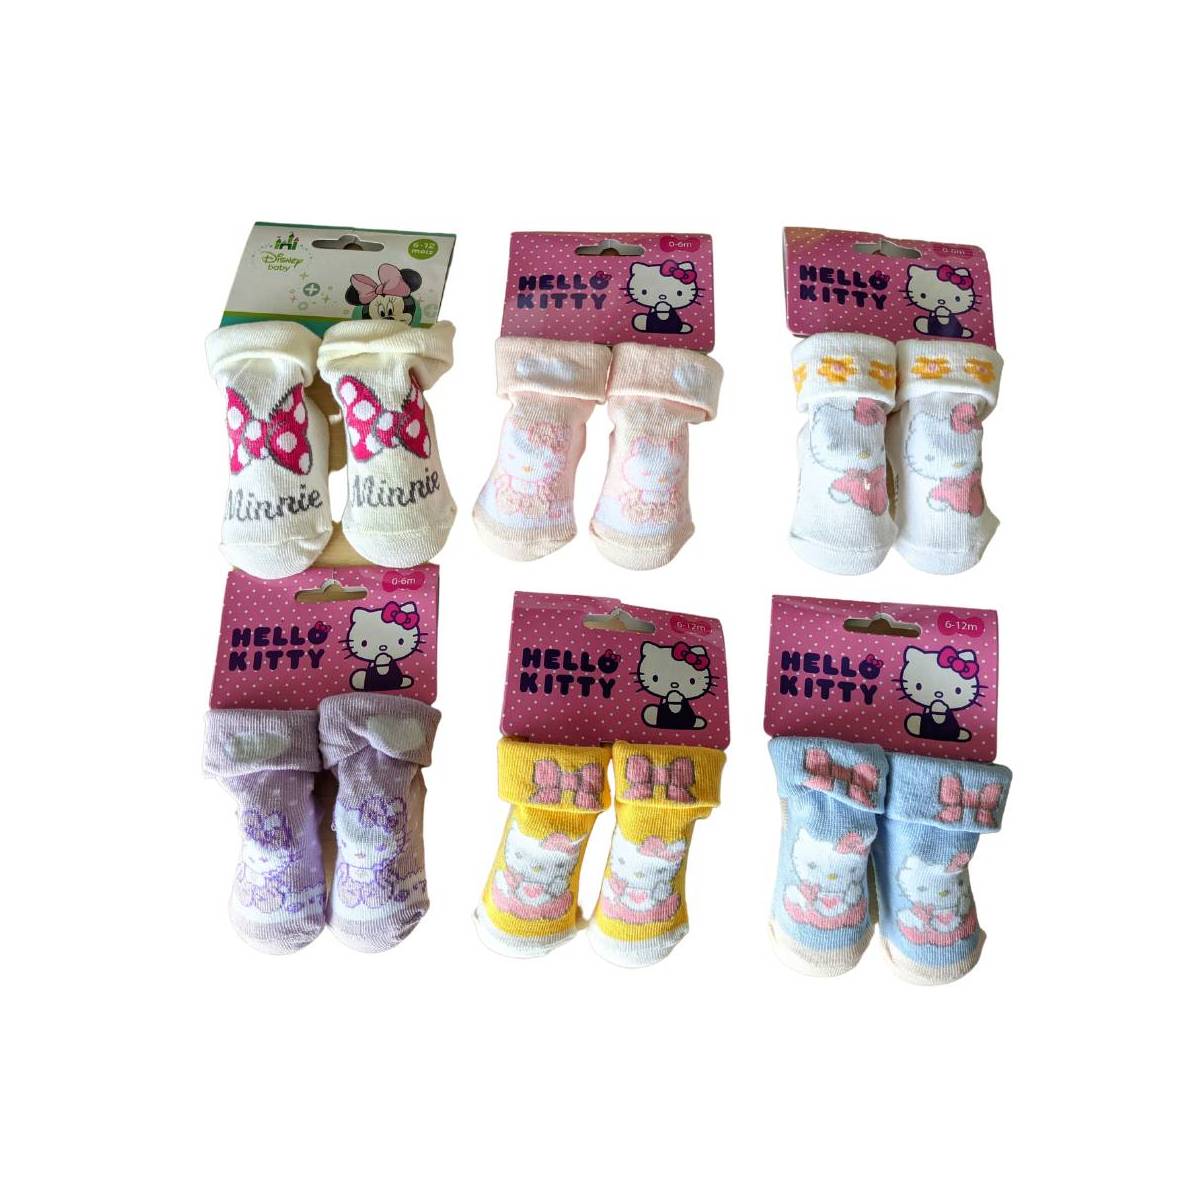 Hello Kitty socks 0 to 6 months and 6 to 12 months